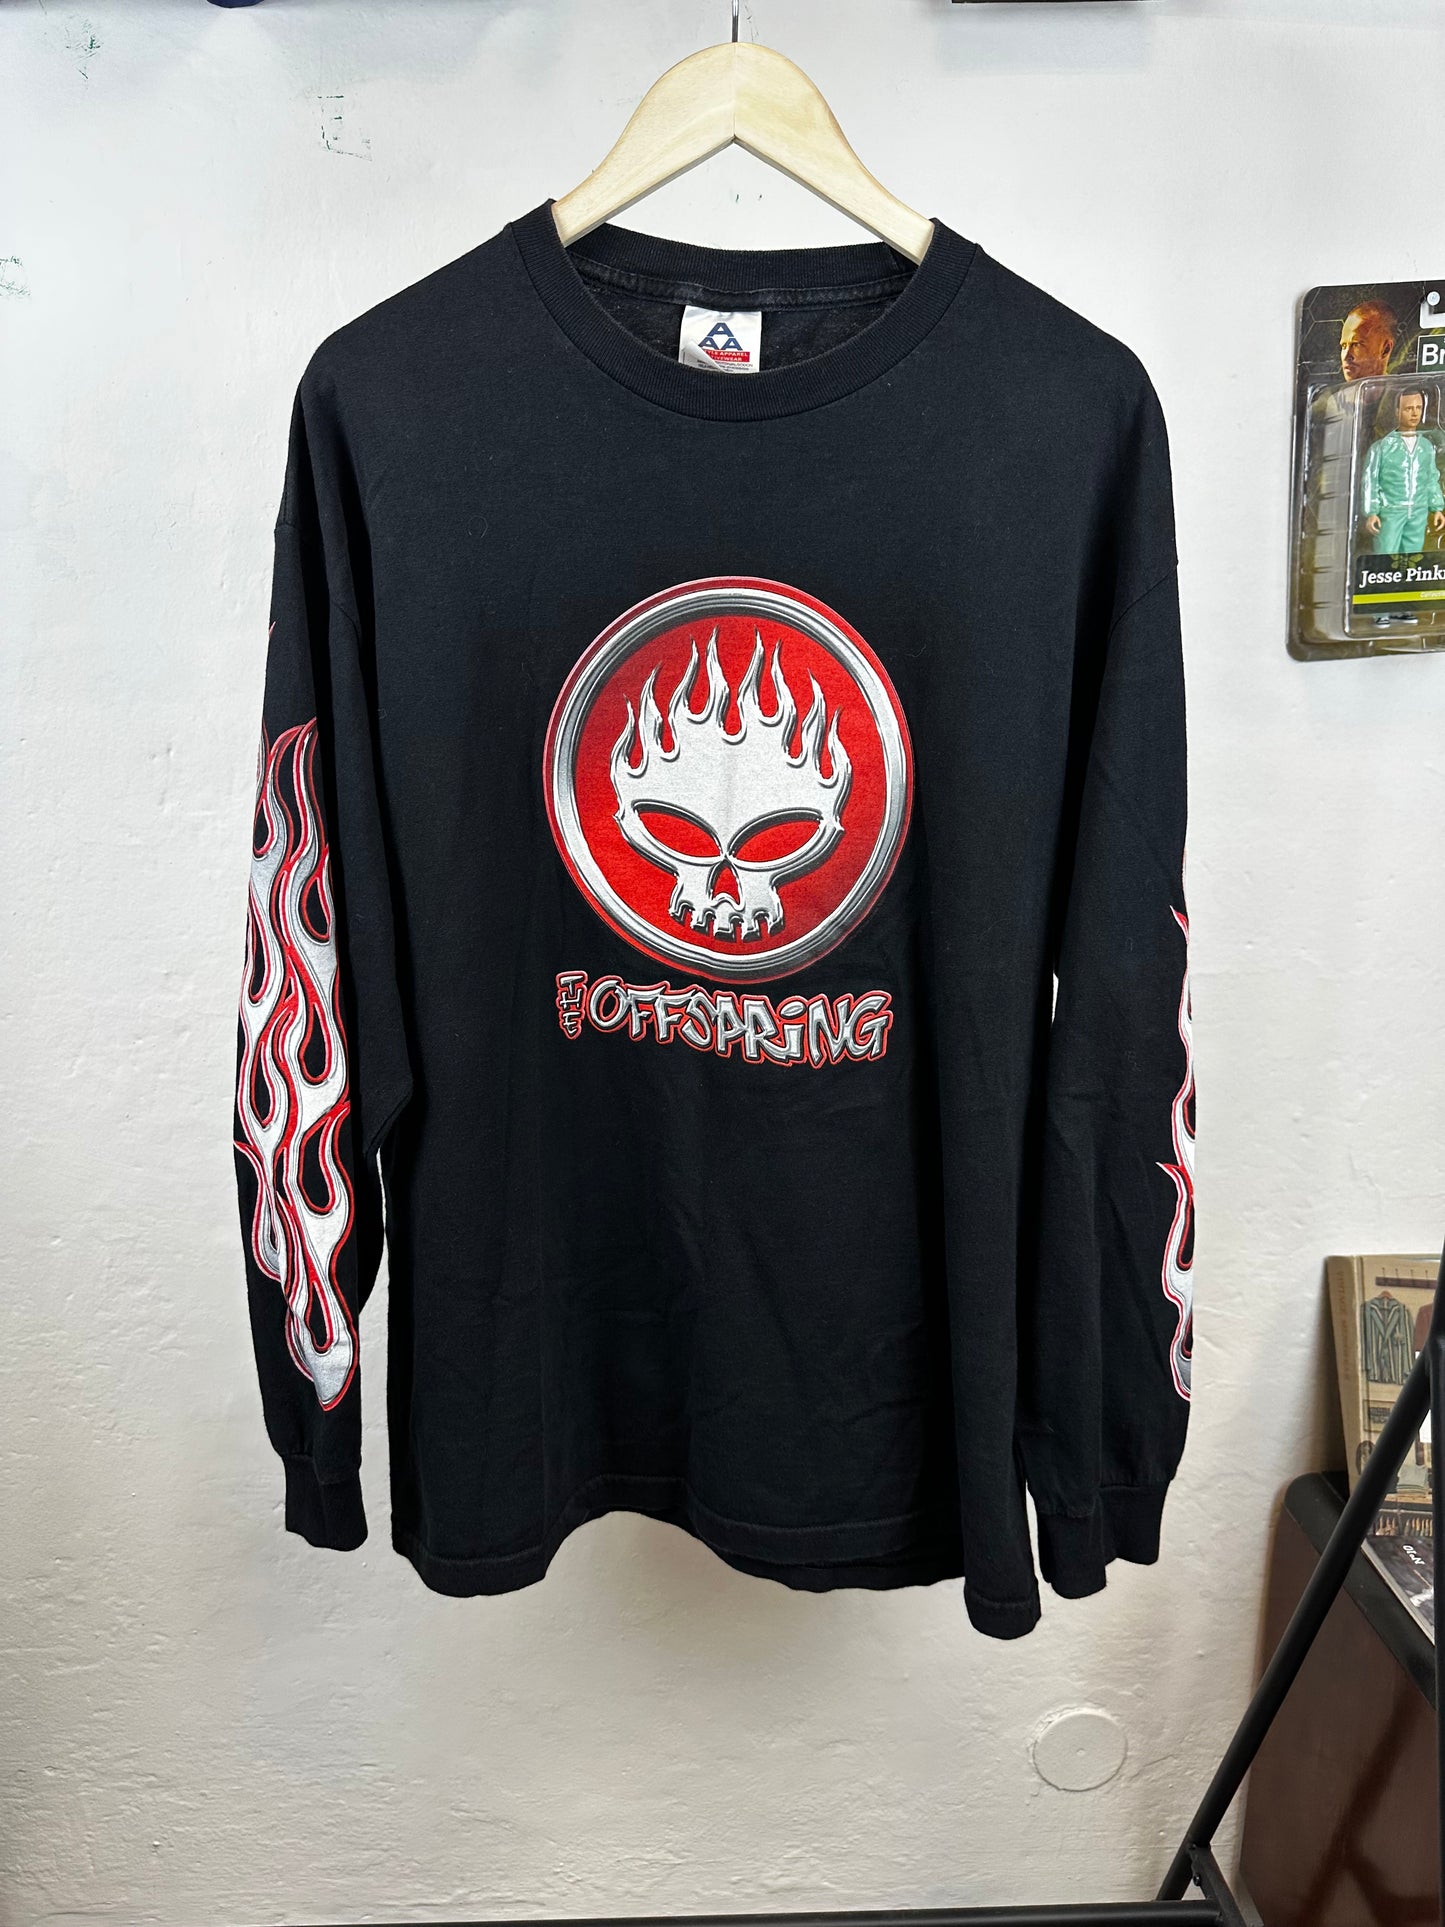 Vintage The Offspring “Conspiracy of One” Longsleeve t-shirt